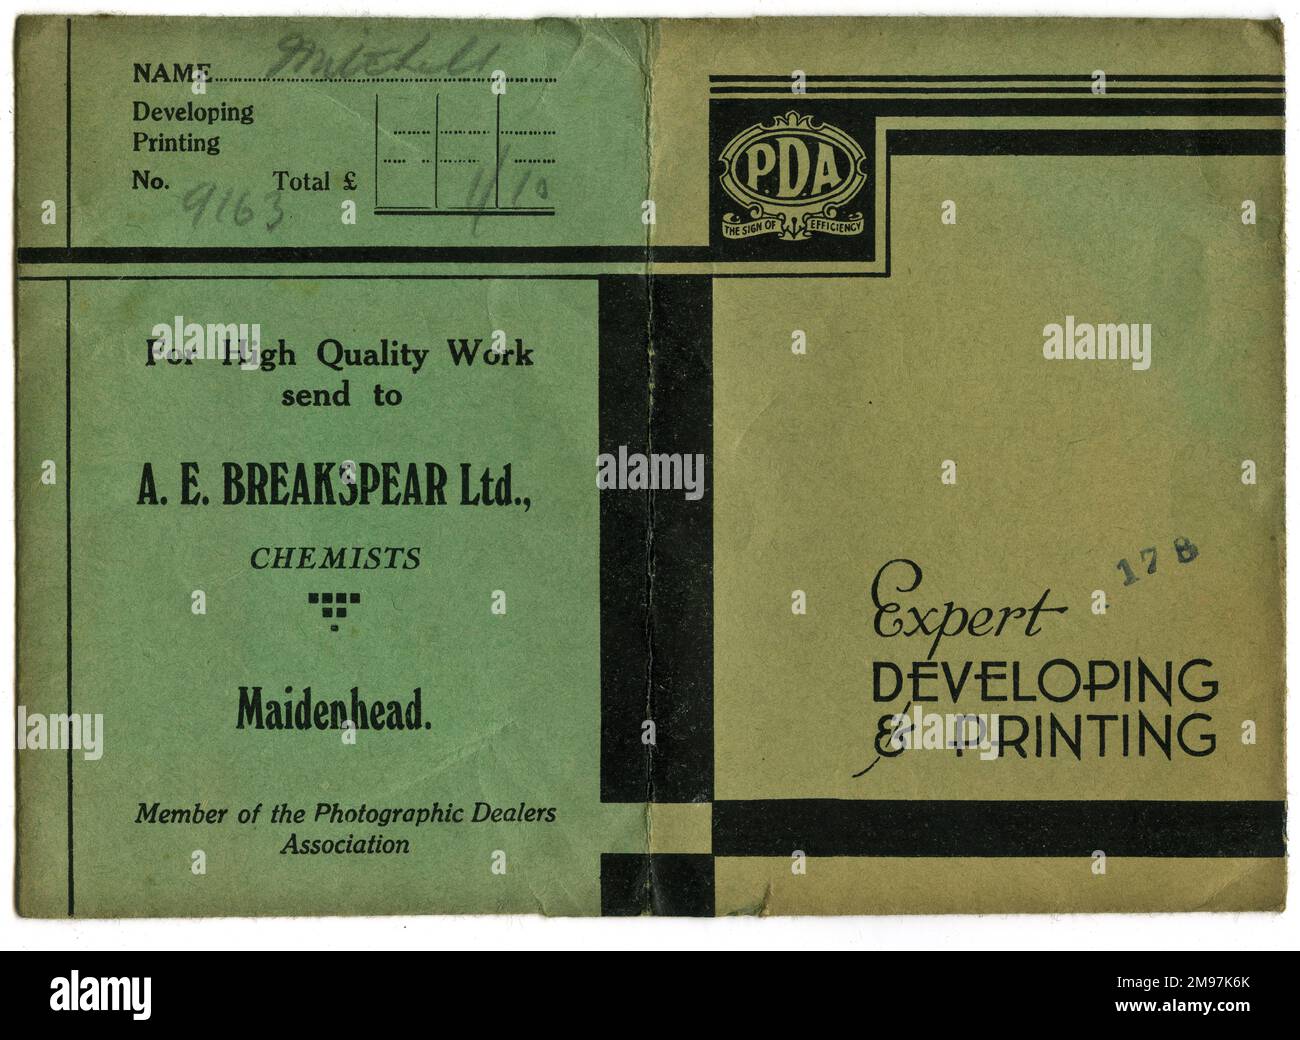 Photographic film wallet from A E Breakspear Ltd of Maidenhead, members of the Photographic Dealers Association. The customer's name is Mitchell and the cost of developing is one shilling and tenpence. Stock Photo